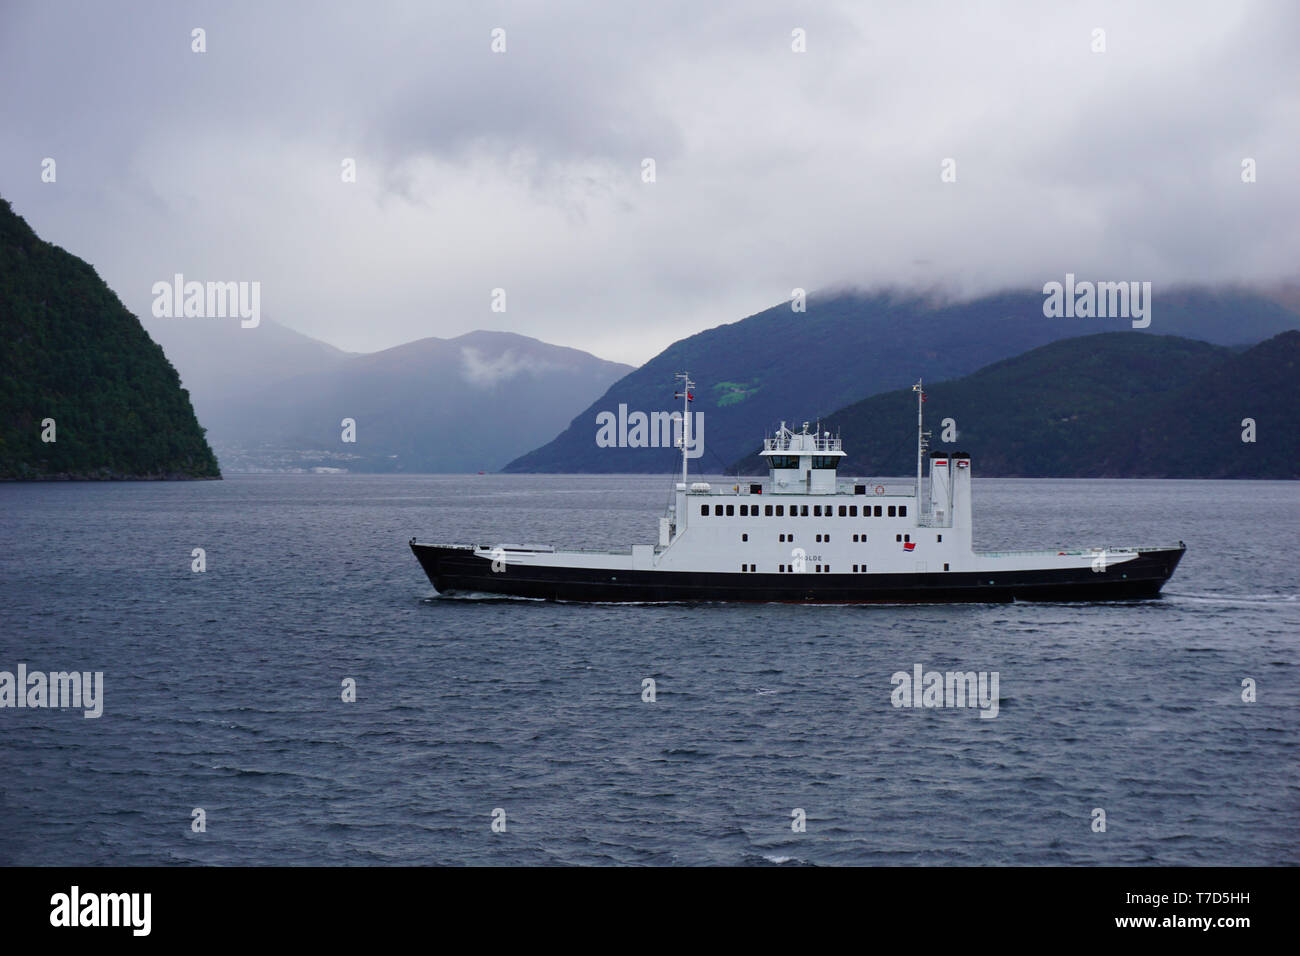 car ferry on a cloudly day in norway Stock Photo